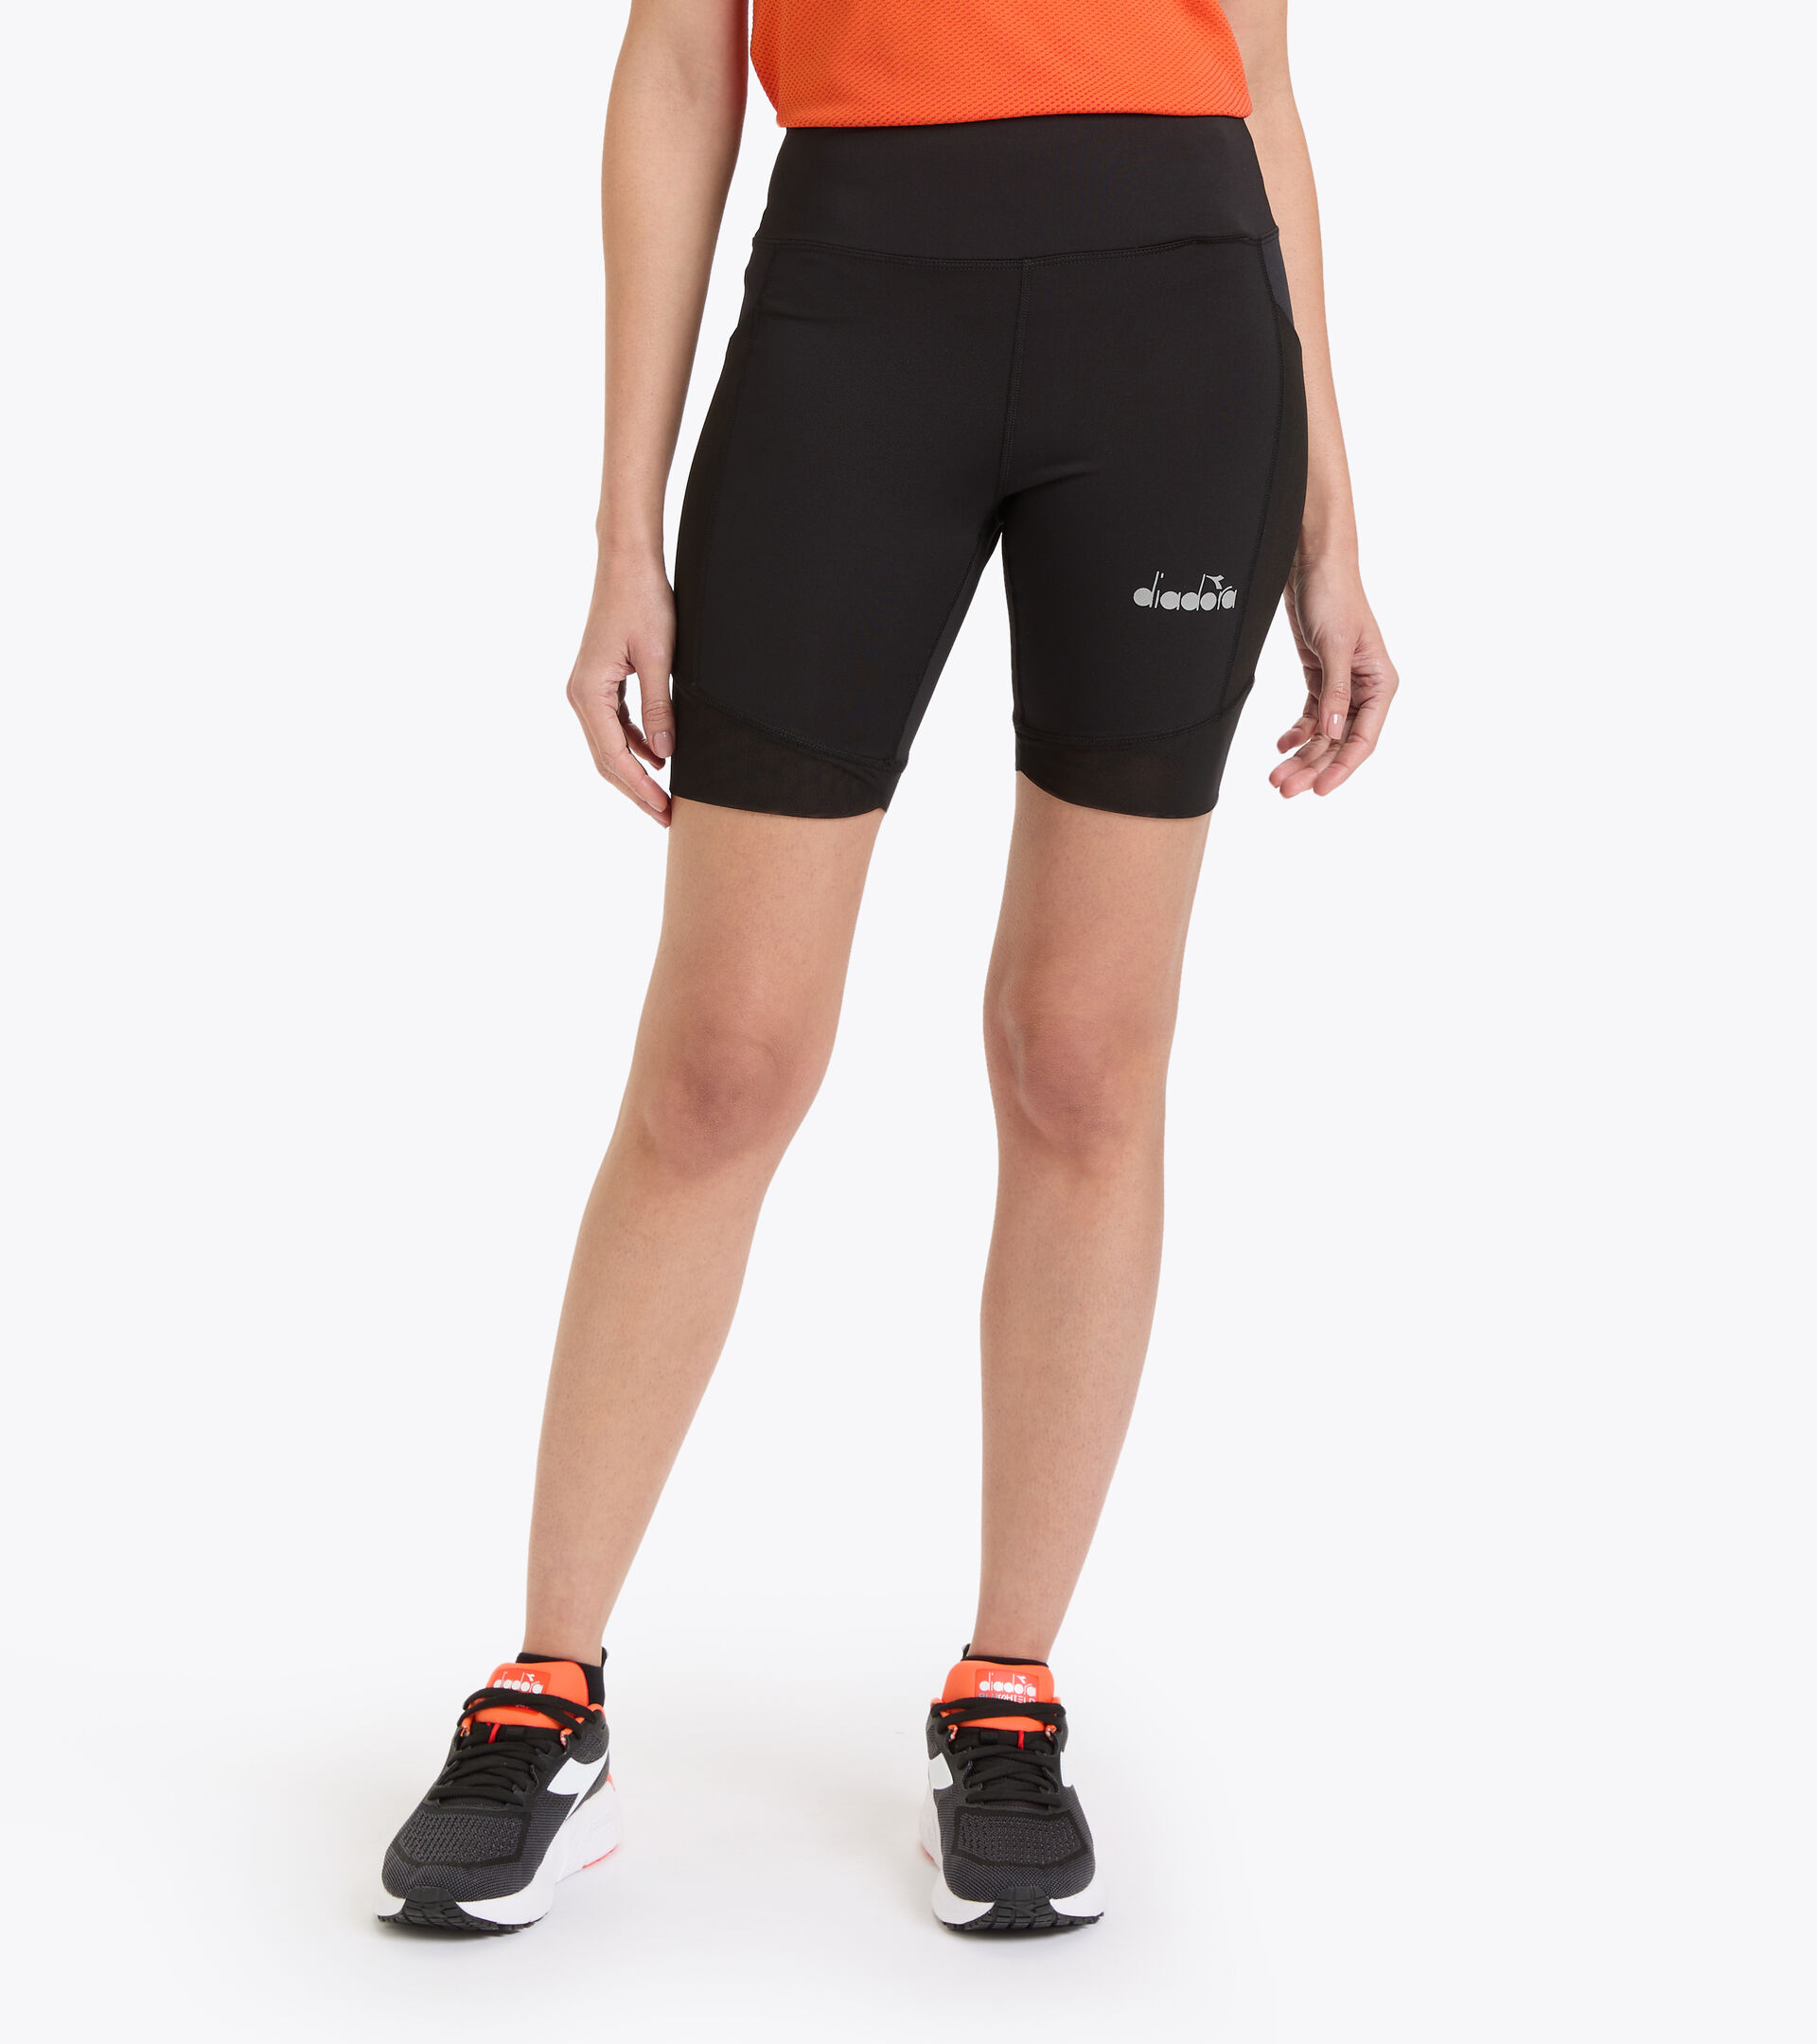 These Bike Shorts Are Trail-ready